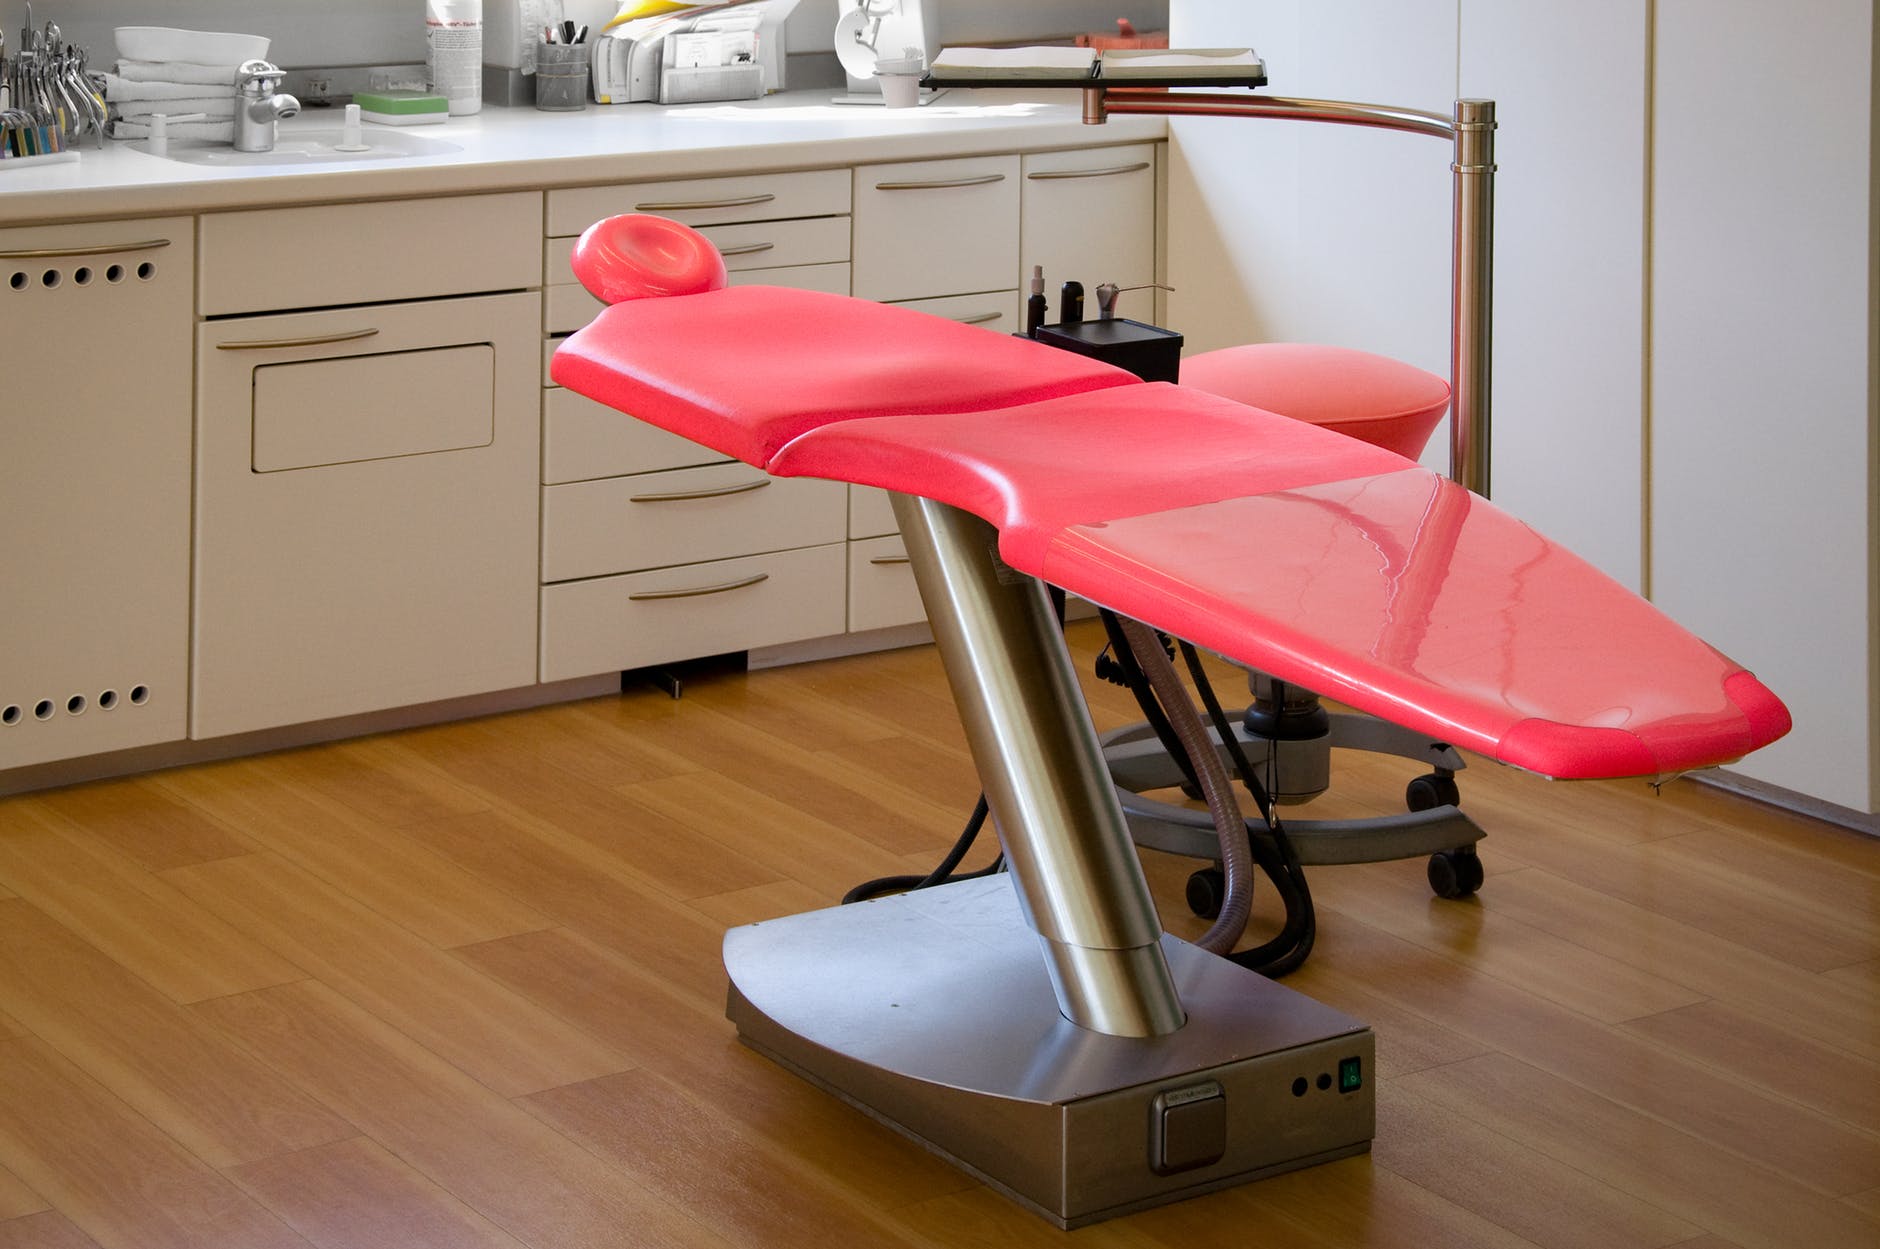 Practical tips to make your dental practice more profitable